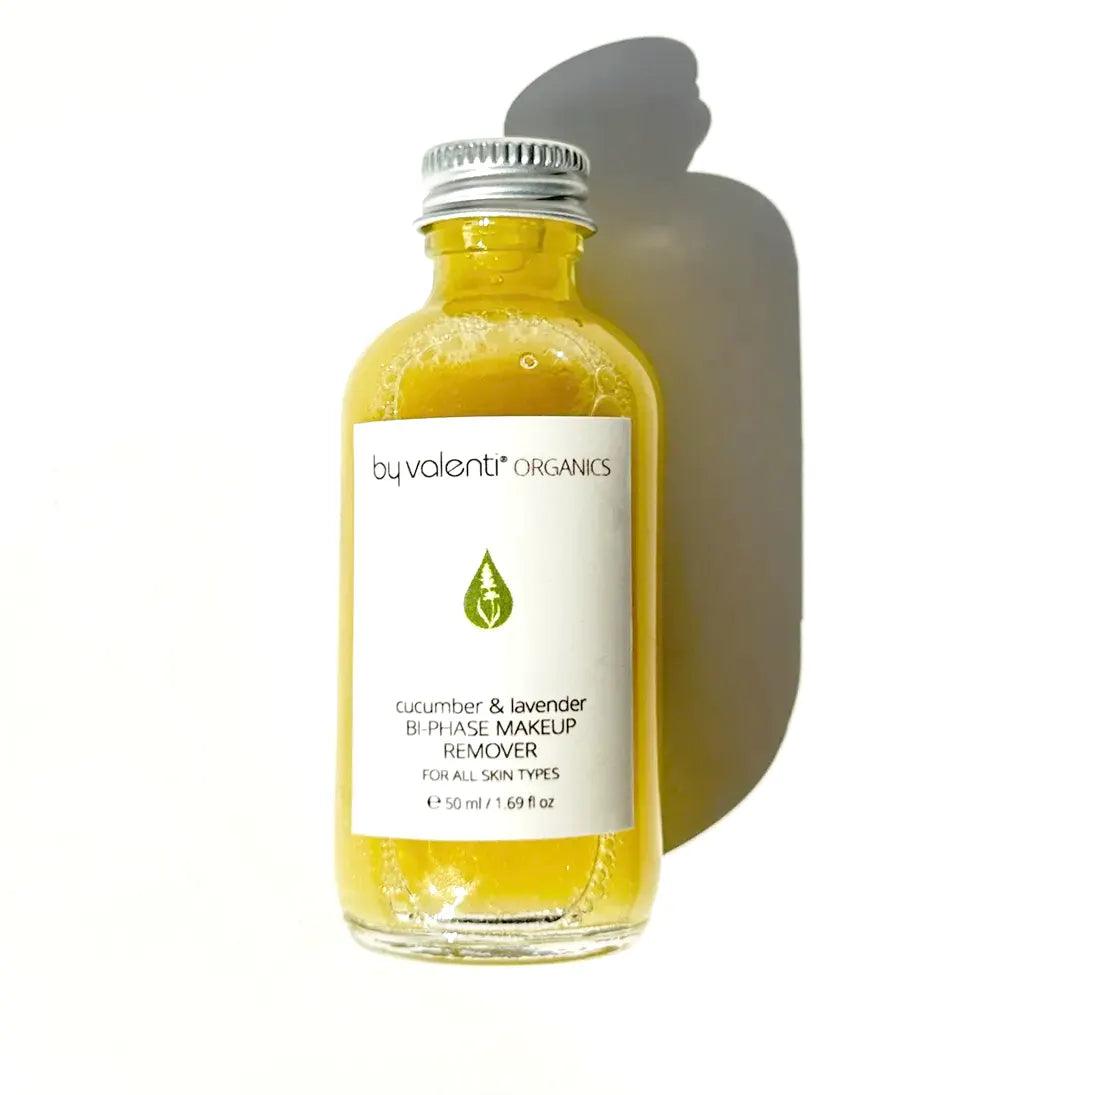 Cucumbre Lavender Biphase Makeup Remover By Valenti Organics Clean Cruelty Free Cosmetics